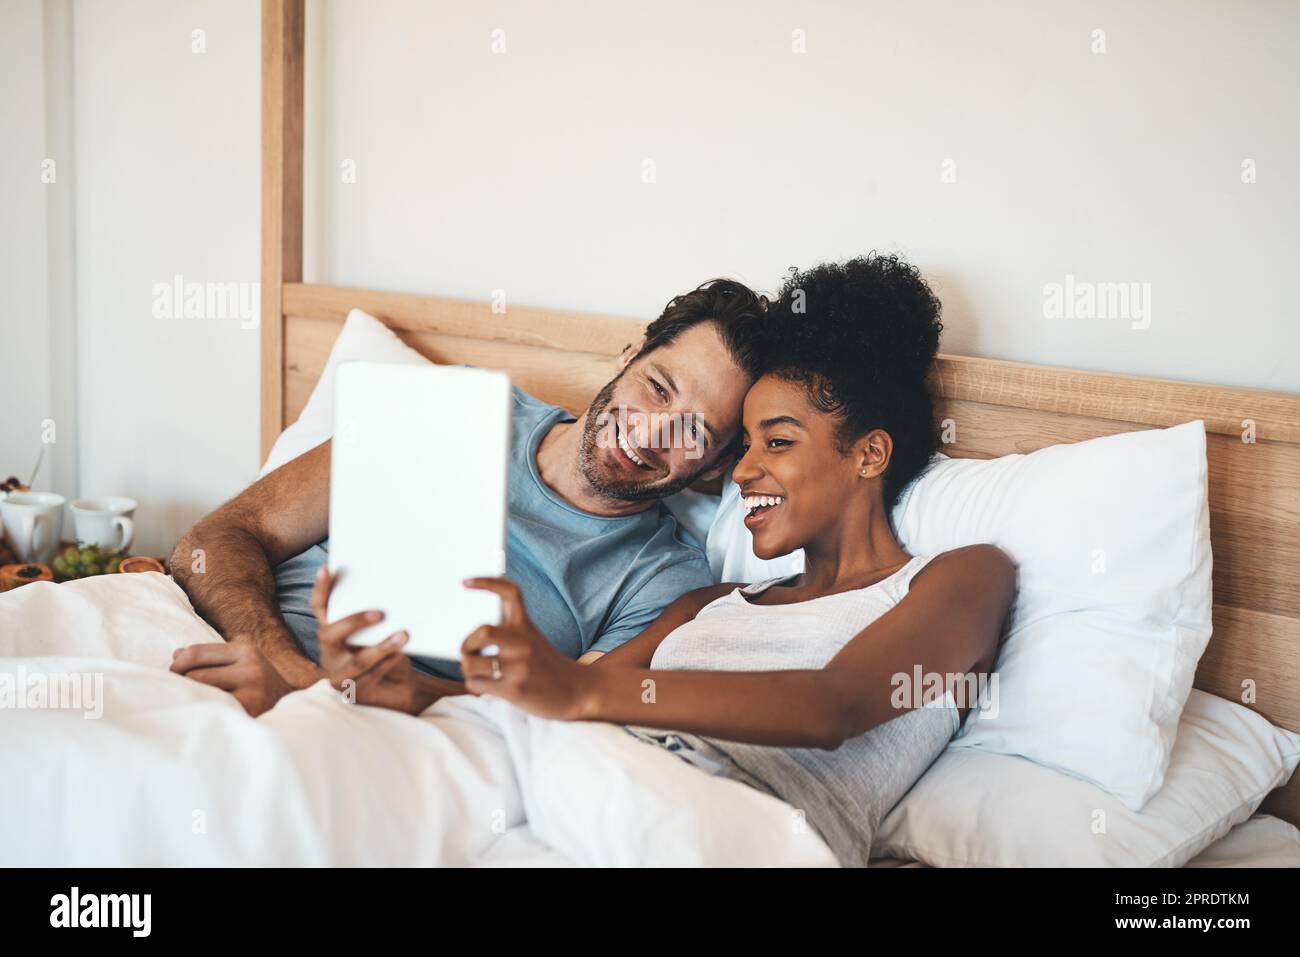 Happy couple taking selfie on a tablet in bed together after waking up. Interracial husband and wife enjoying their relationship, having fun while bonding and relaxing indoors on a weekend Stock Photo